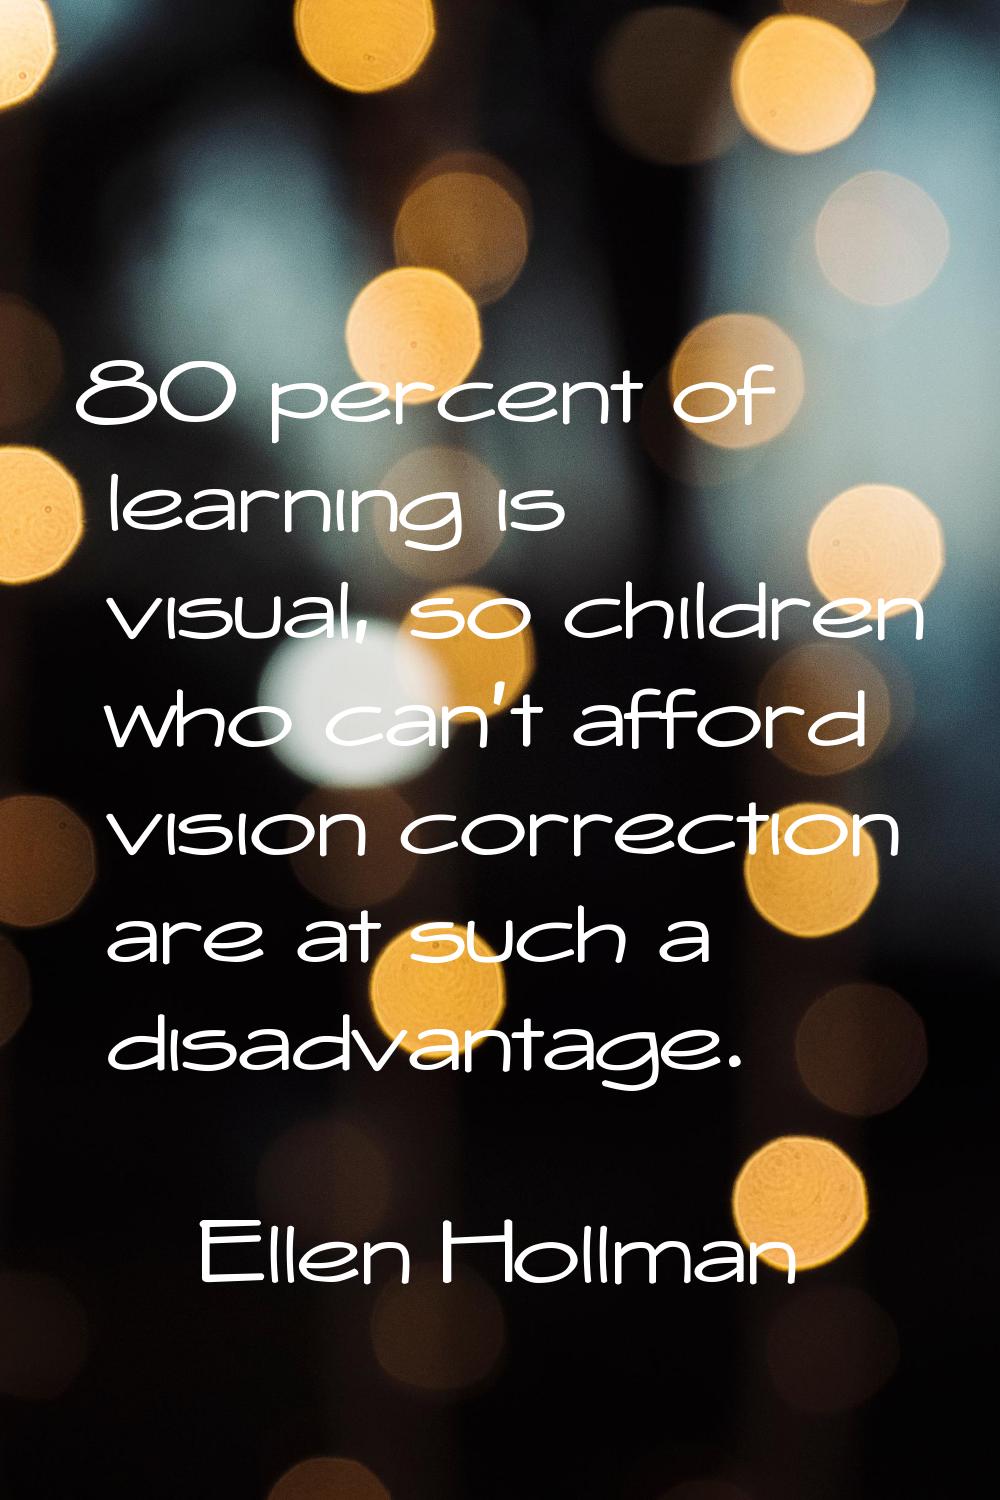 80 percent of learning is visual, so children who can't afford vision correction are at such a disa